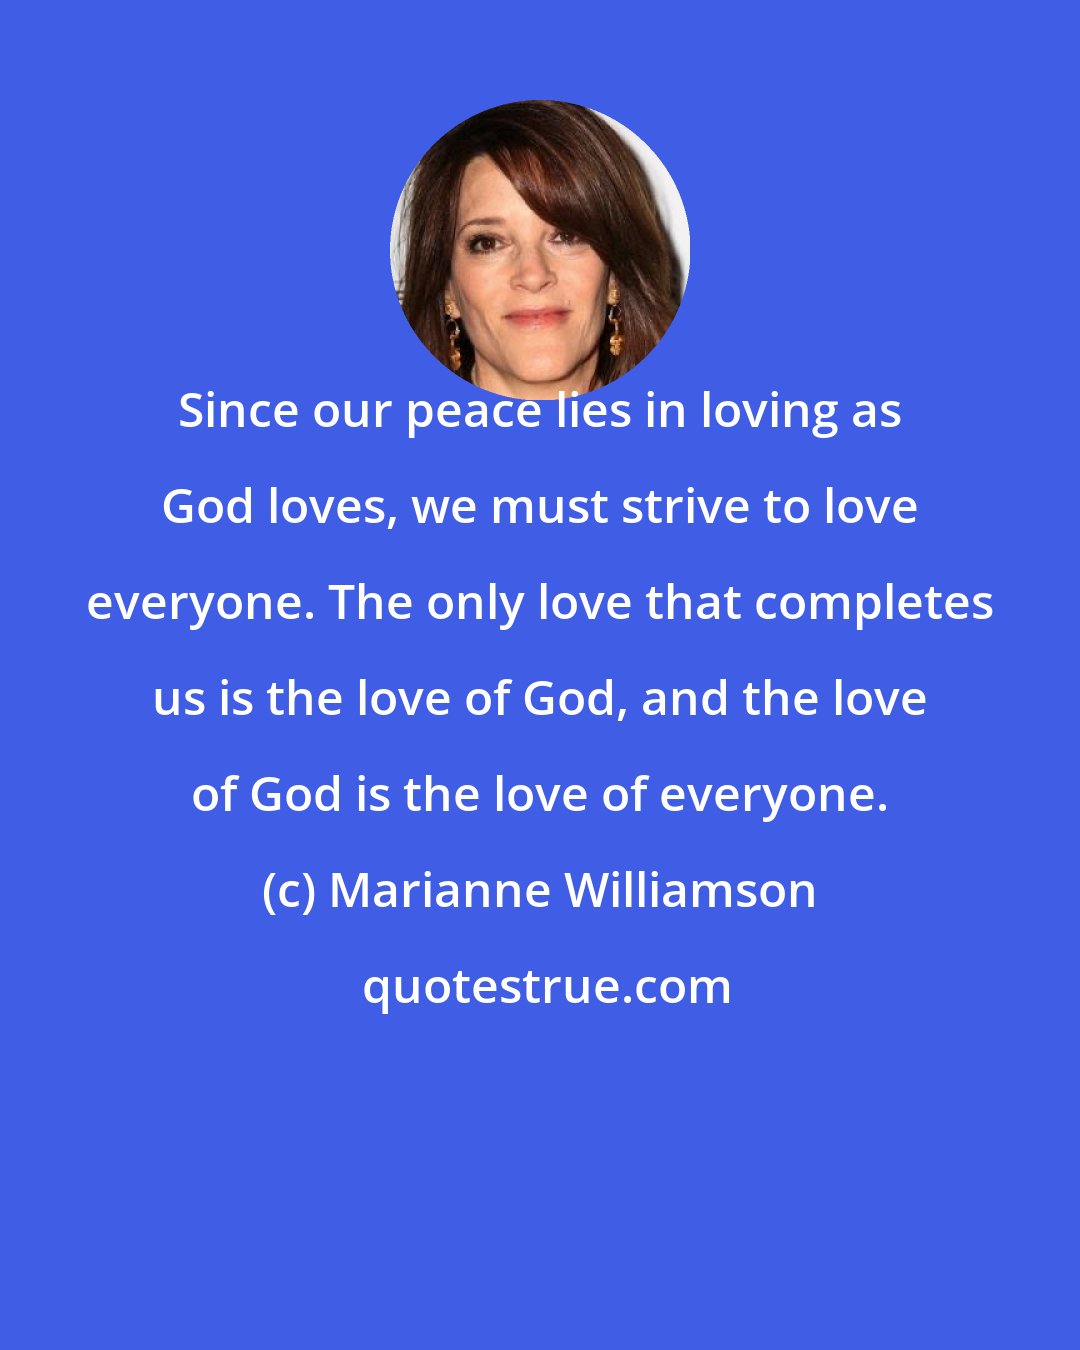 Marianne Williamson: Since our peace lies in loving as God loves, we must strive to love everyone. The only love that completes us is the love of God, and the love of God is the love of everyone.